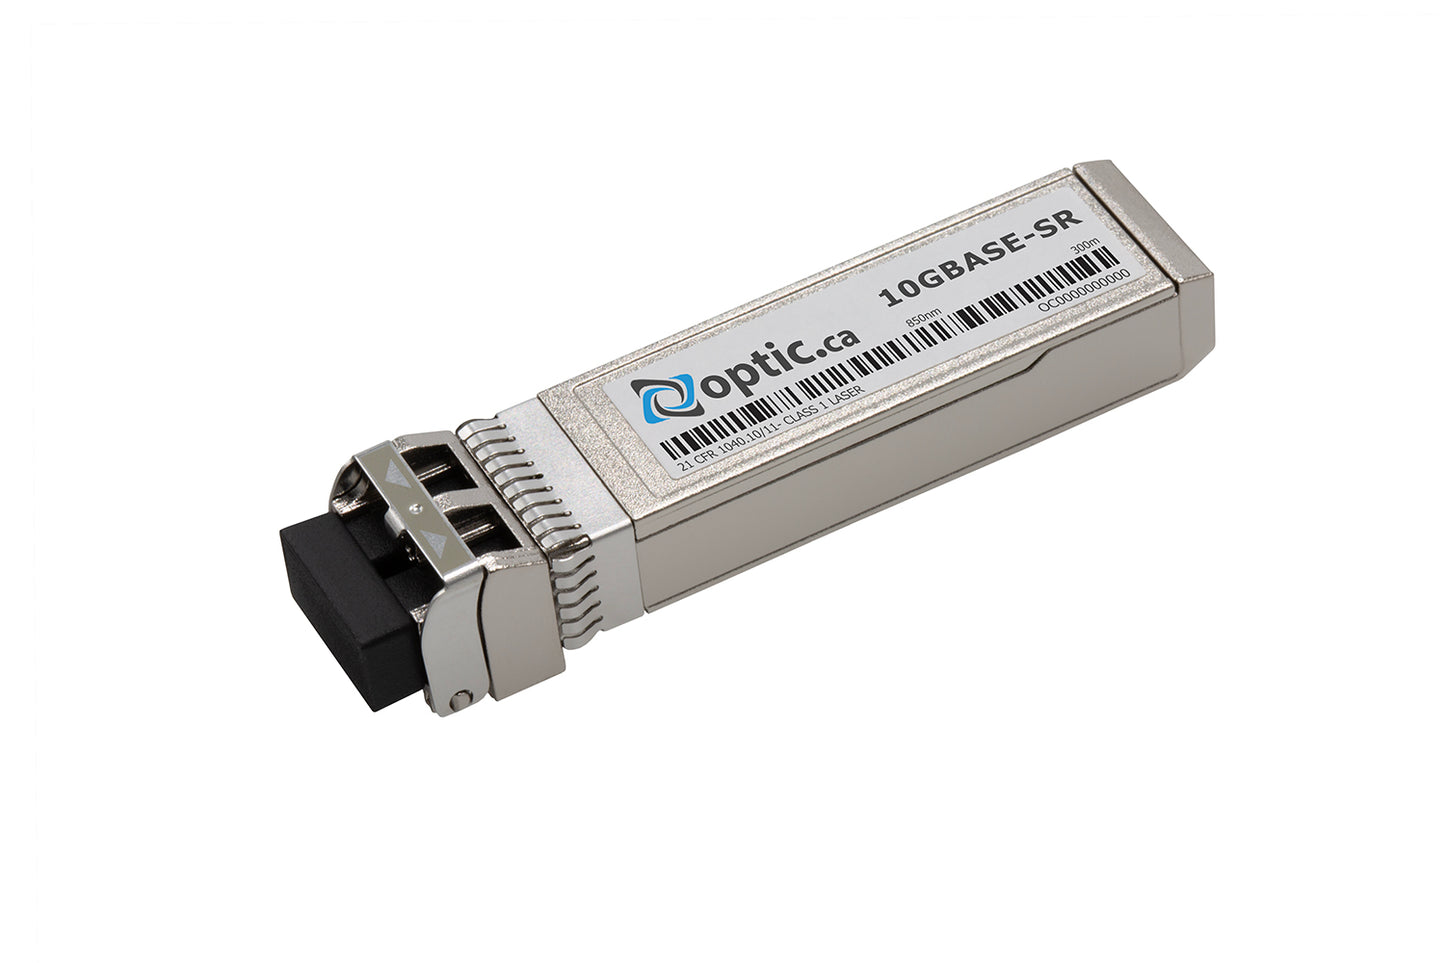 OPTIC.CA - 10GBASE-SR SFP+ - FTLX8571D3BCL-OC - FINISAR COMPATIBLE